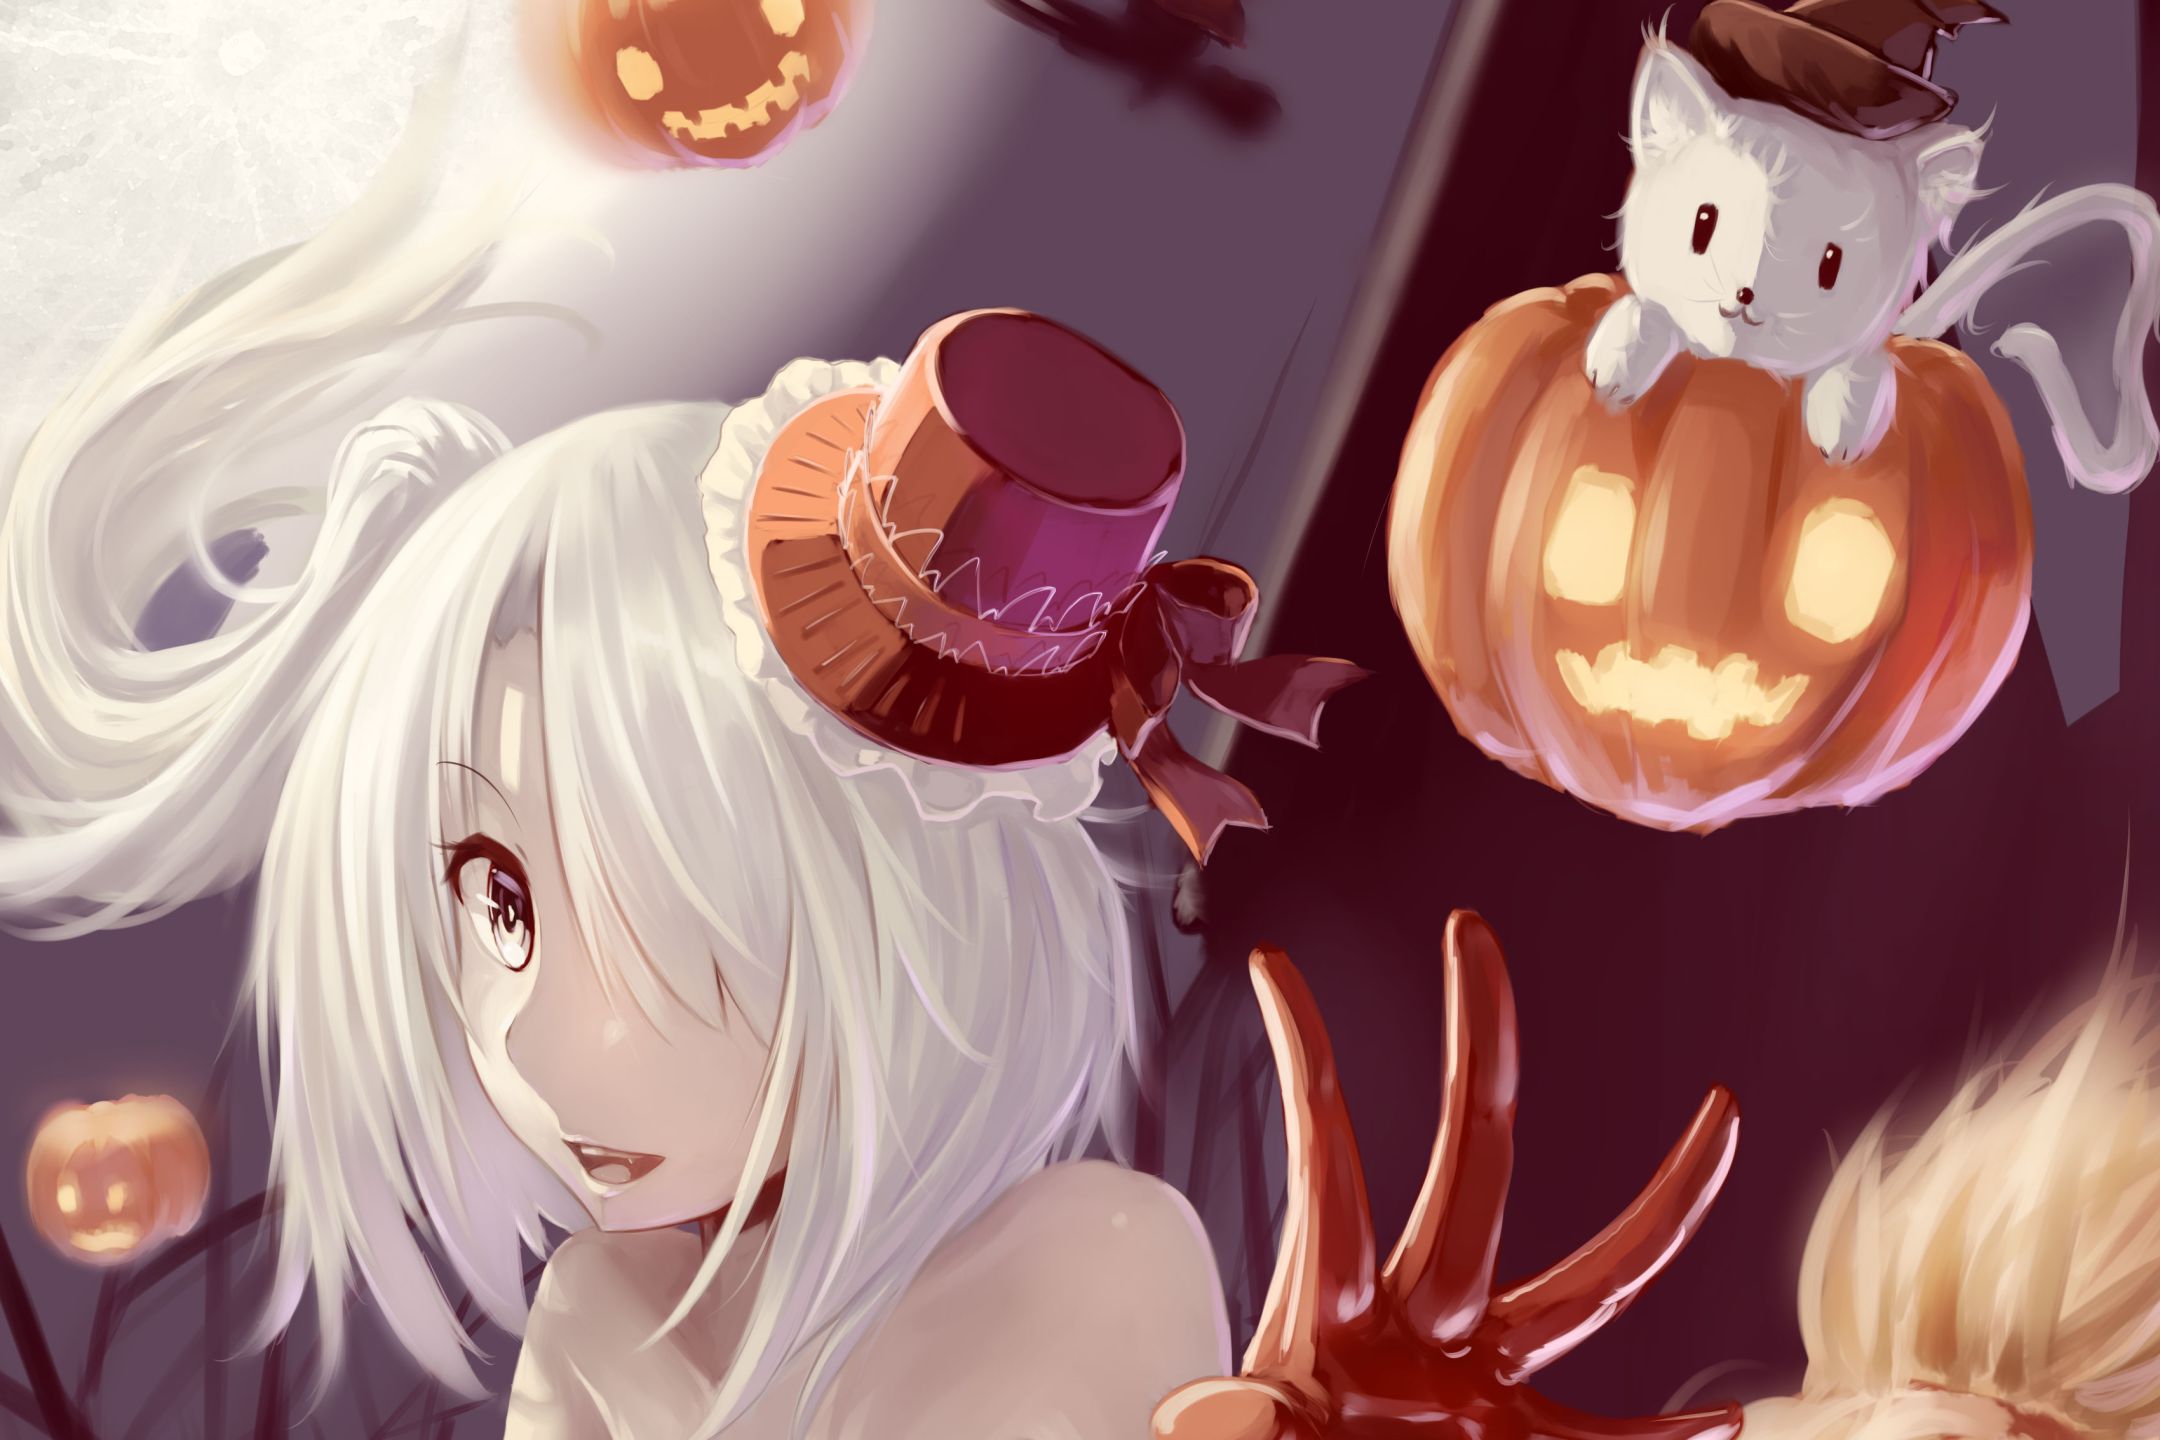 Mobile wallpaper: Anime, Halloween, Pumpkin, Cat, Witch, White Hair,  1315344 download the picture for free.